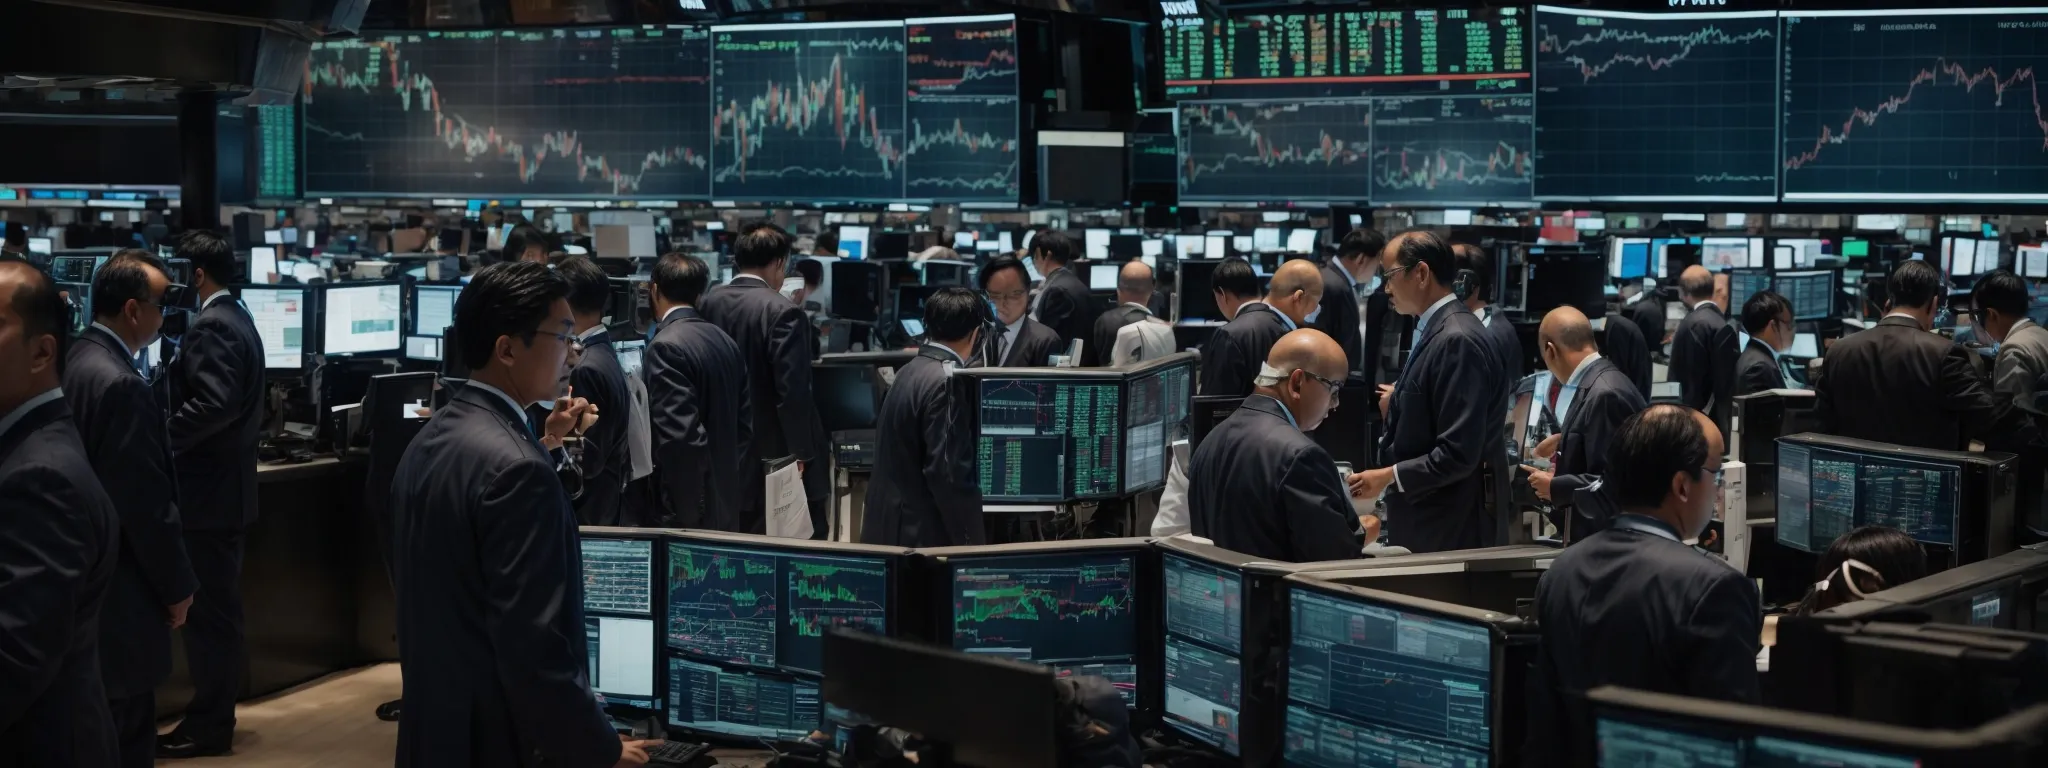 a bustling stock market floor with traders intently focused on screens displaying dynamic charts and graphs.